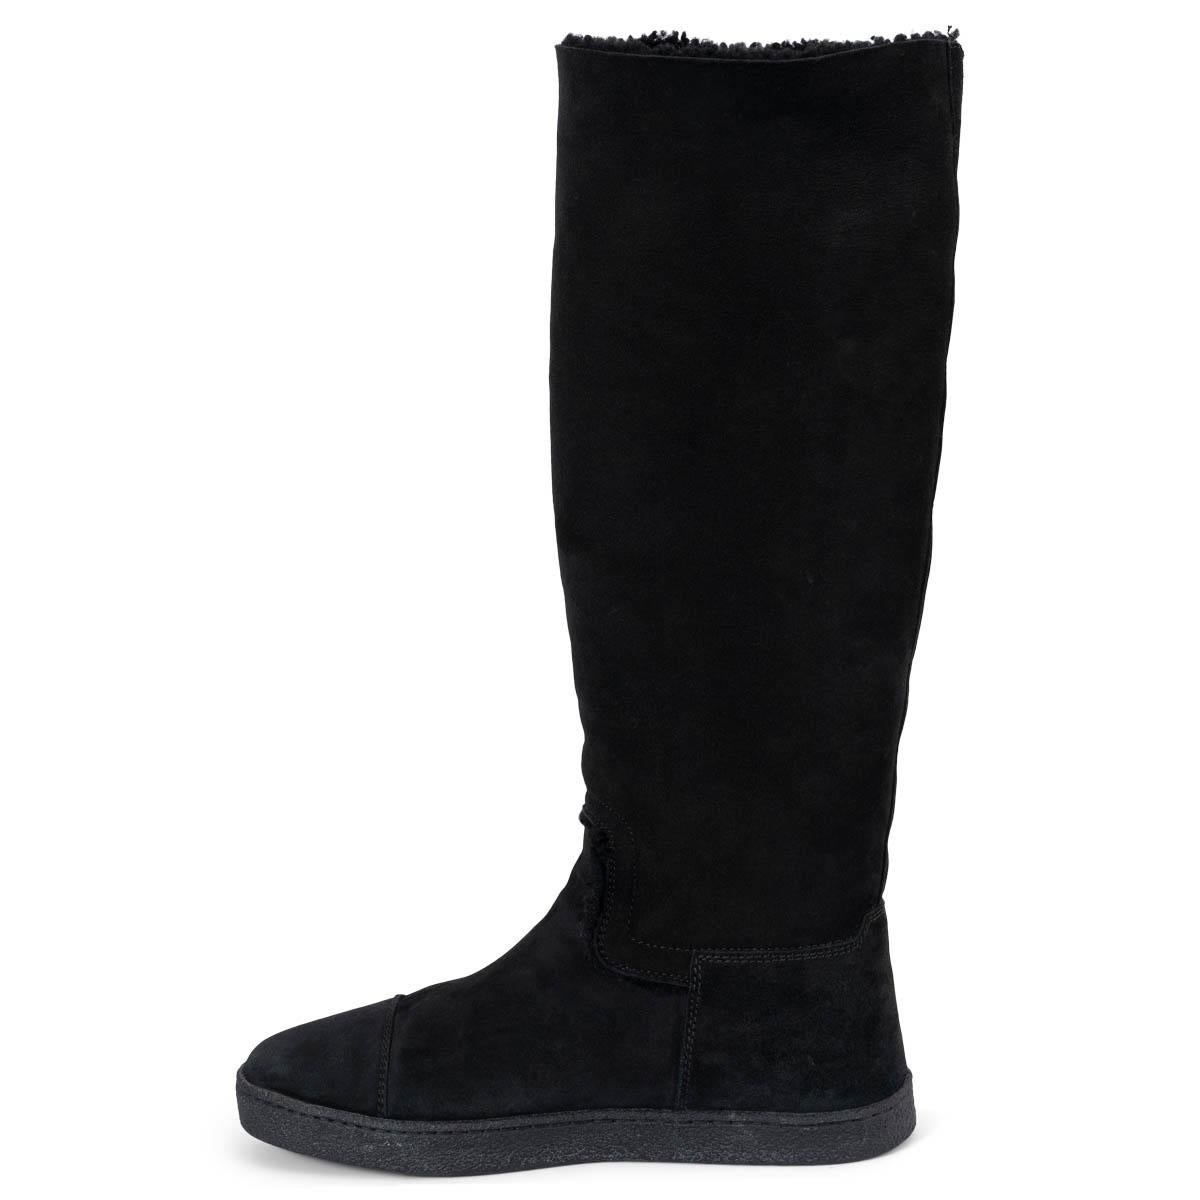 Black CHANEL black suede 2008 SHEARLING FLAT Boots Shoes 39